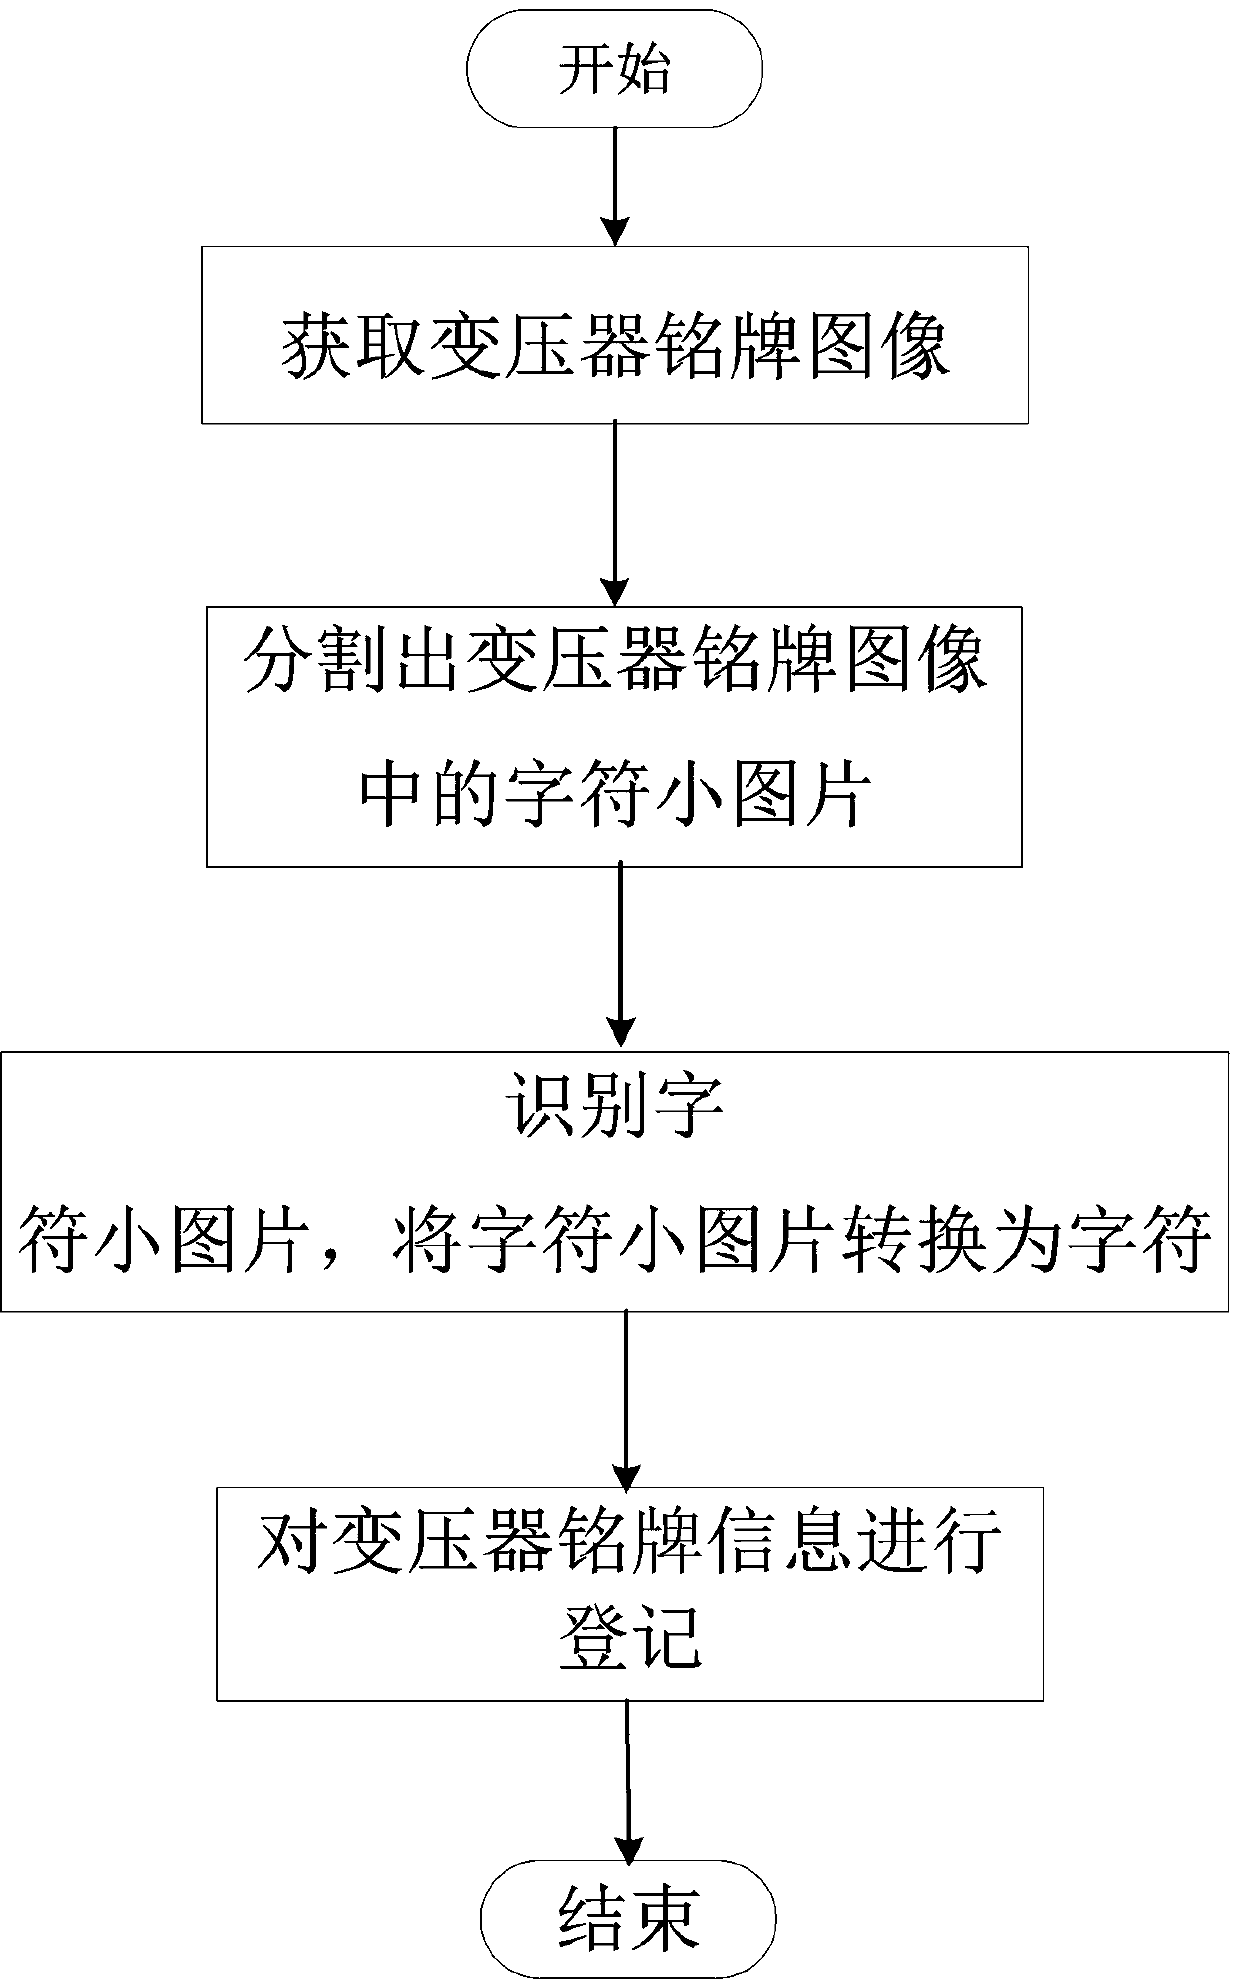 Transformer nameplate information acquisition method and intelligent acquisition system